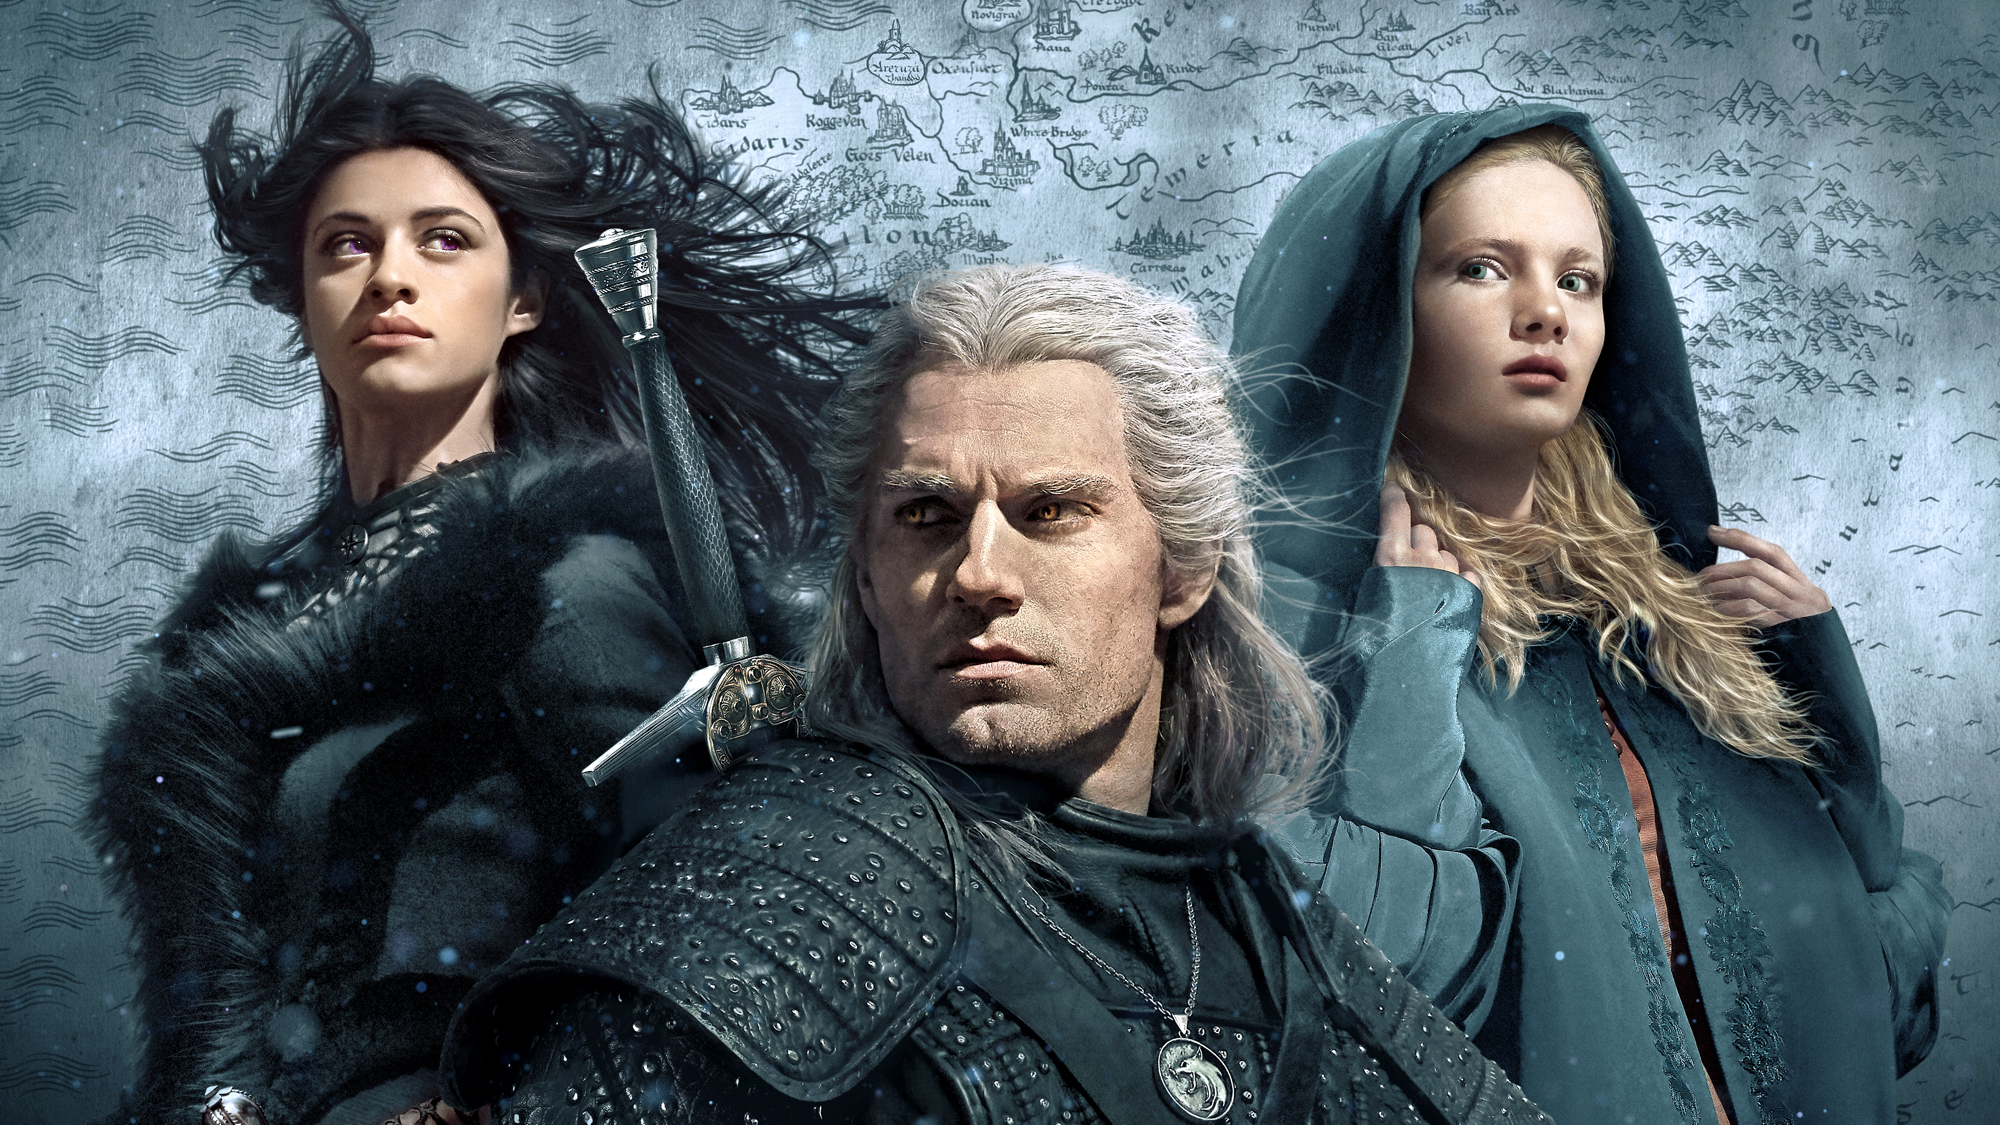 (L to R) Anya Chalotra as Yennefer of Vengerberg, Henry Cavill as Geralt of Rivia and Freya Allan as Ciri in show art for The Witcher